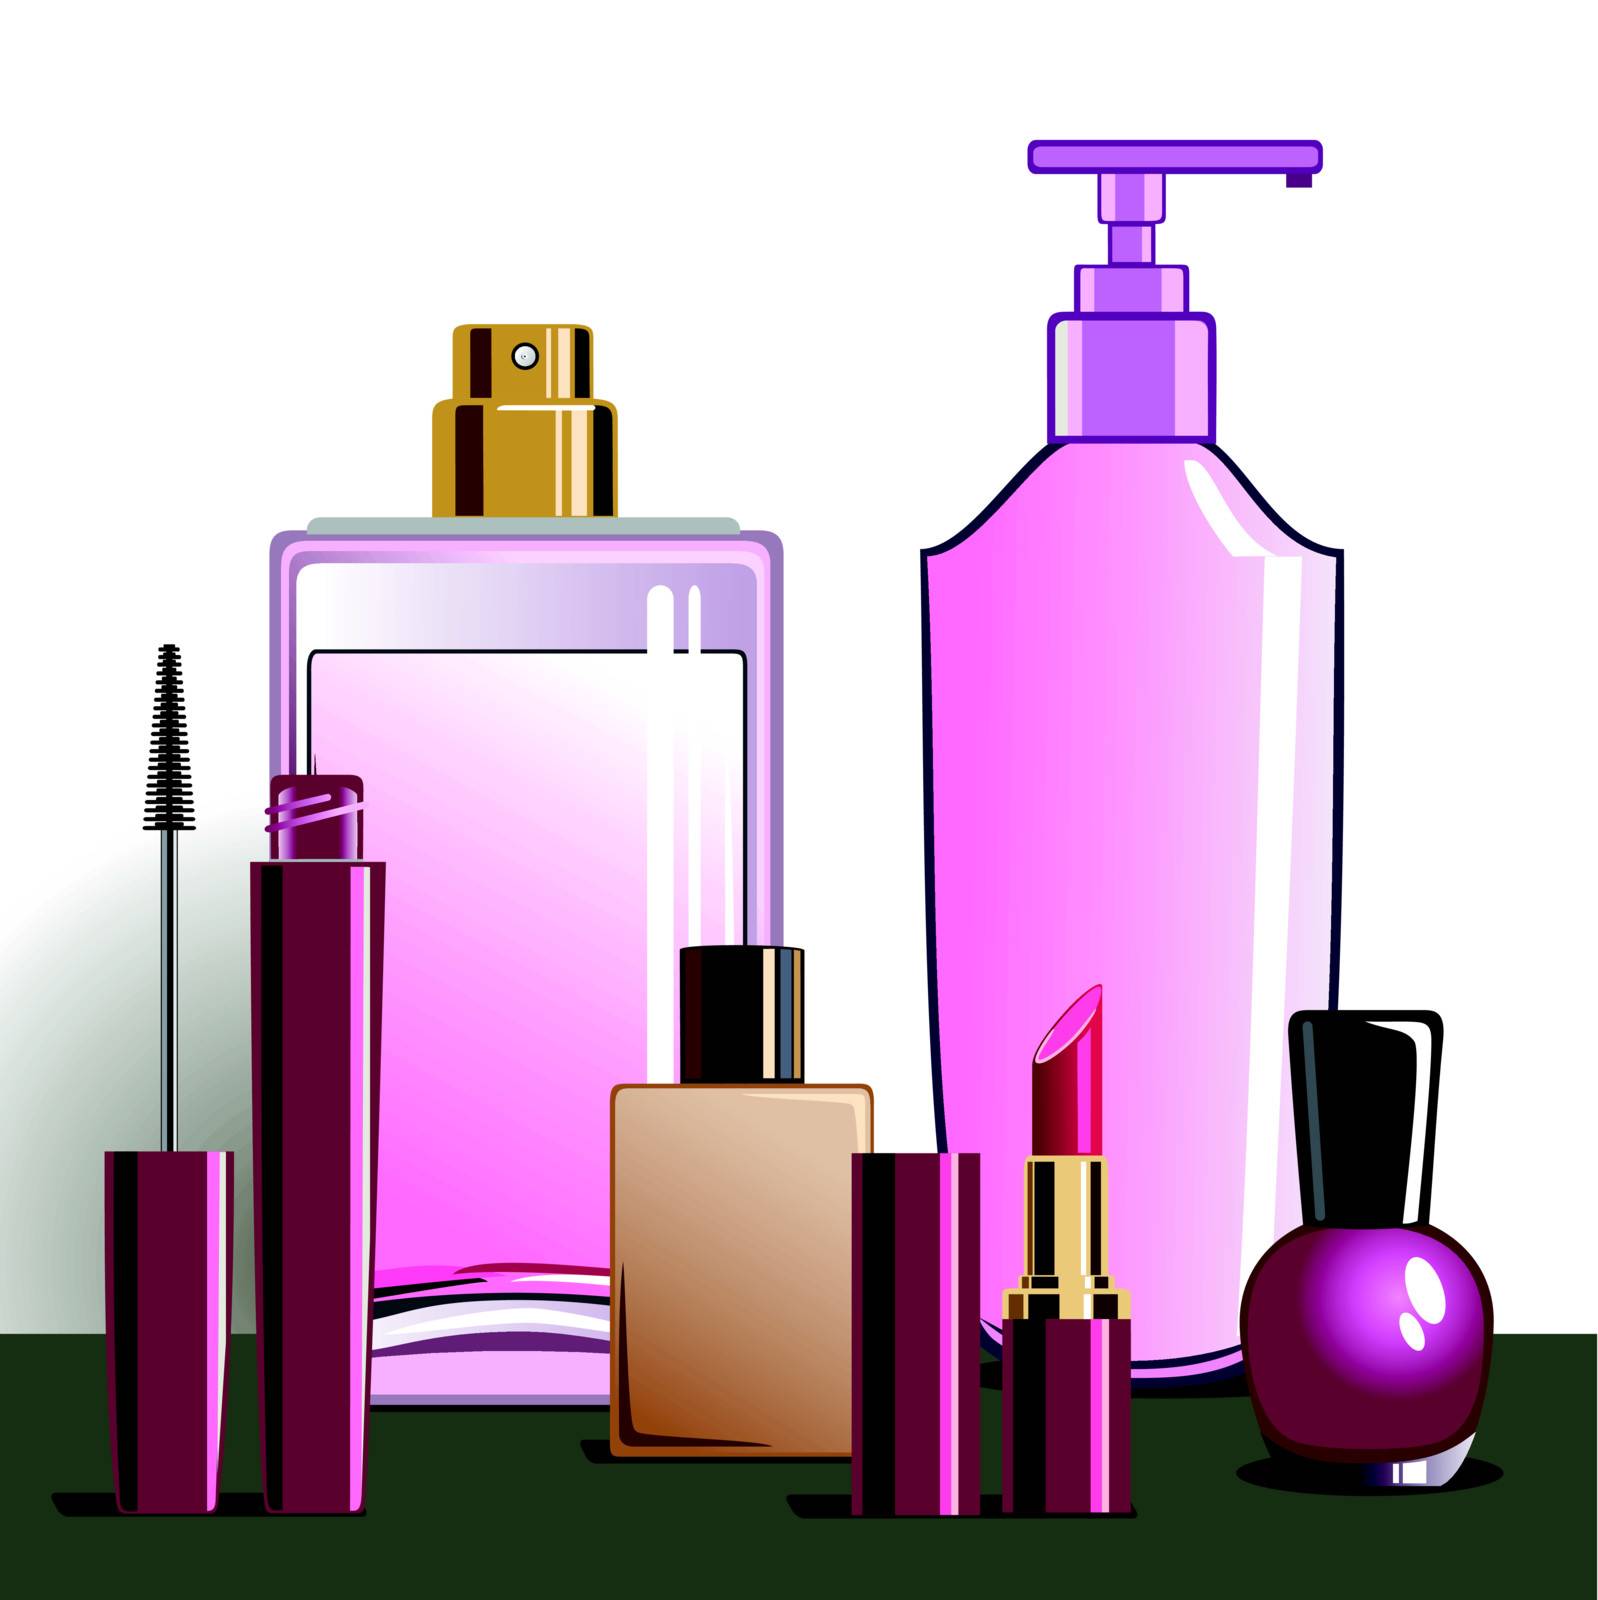 Collection of cosmetics and beauty products, full scalable vector graphic, change the colors as you like.